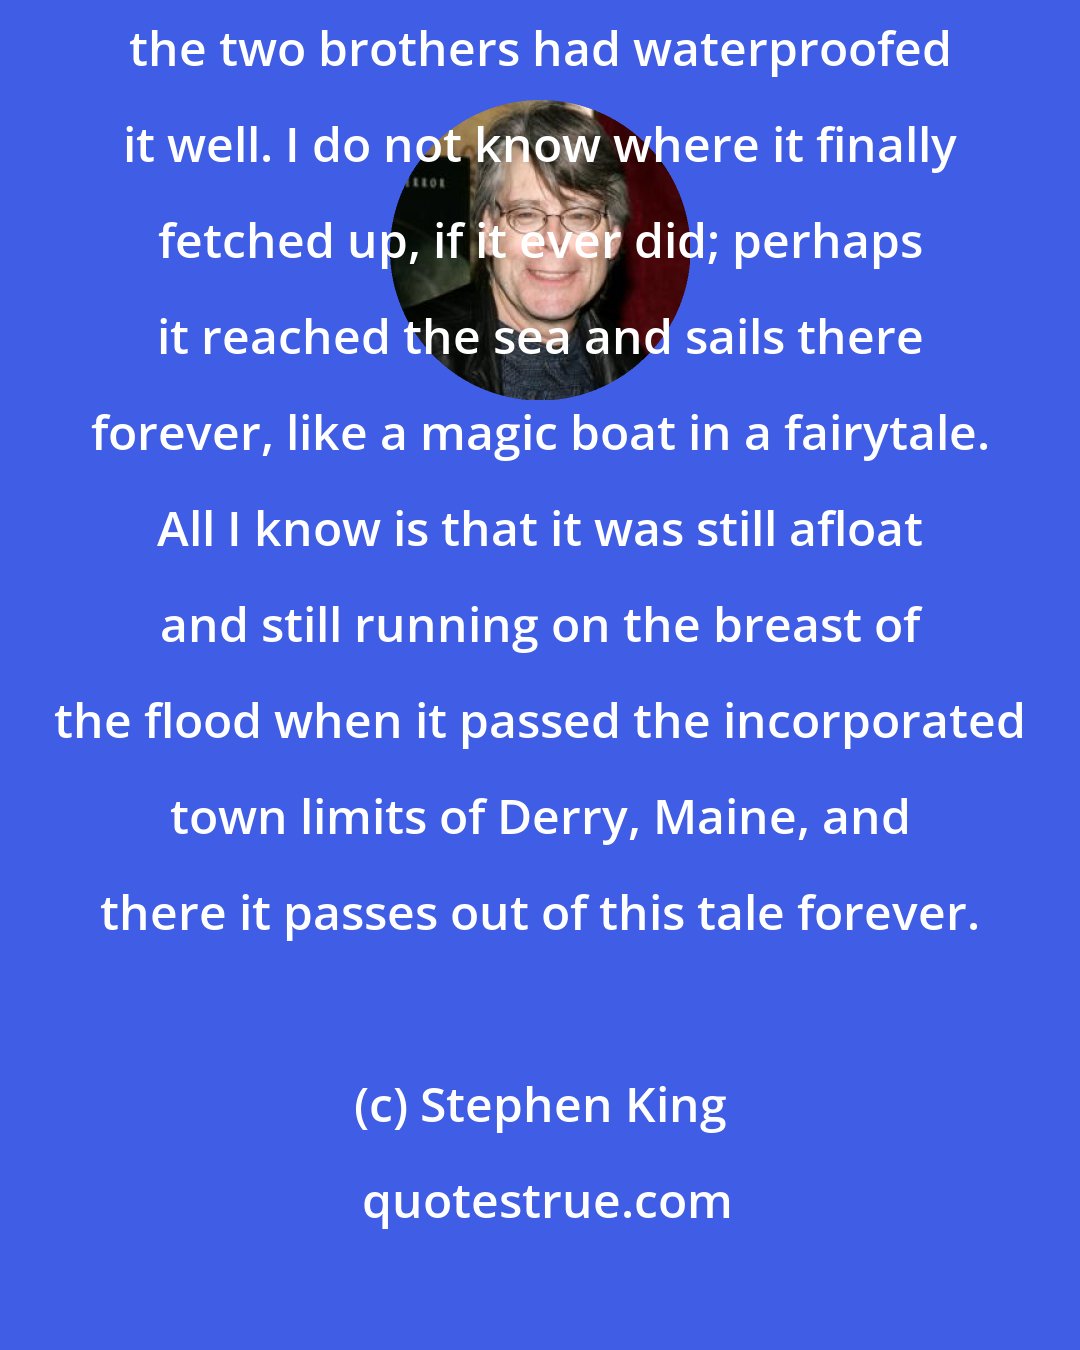 Stephen King: The boat dipped and swayed and sometimes took on water, but it did not sink; the two brothers had waterproofed it well. I do not know where it finally fetched up, if it ever did; perhaps it reached the sea and sails there forever, like a magic boat in a fairytale. All I know is that it was still afloat and still running on the breast of the flood when it passed the incorporated town limits of Derry, Maine, and there it passes out of this tale forever.